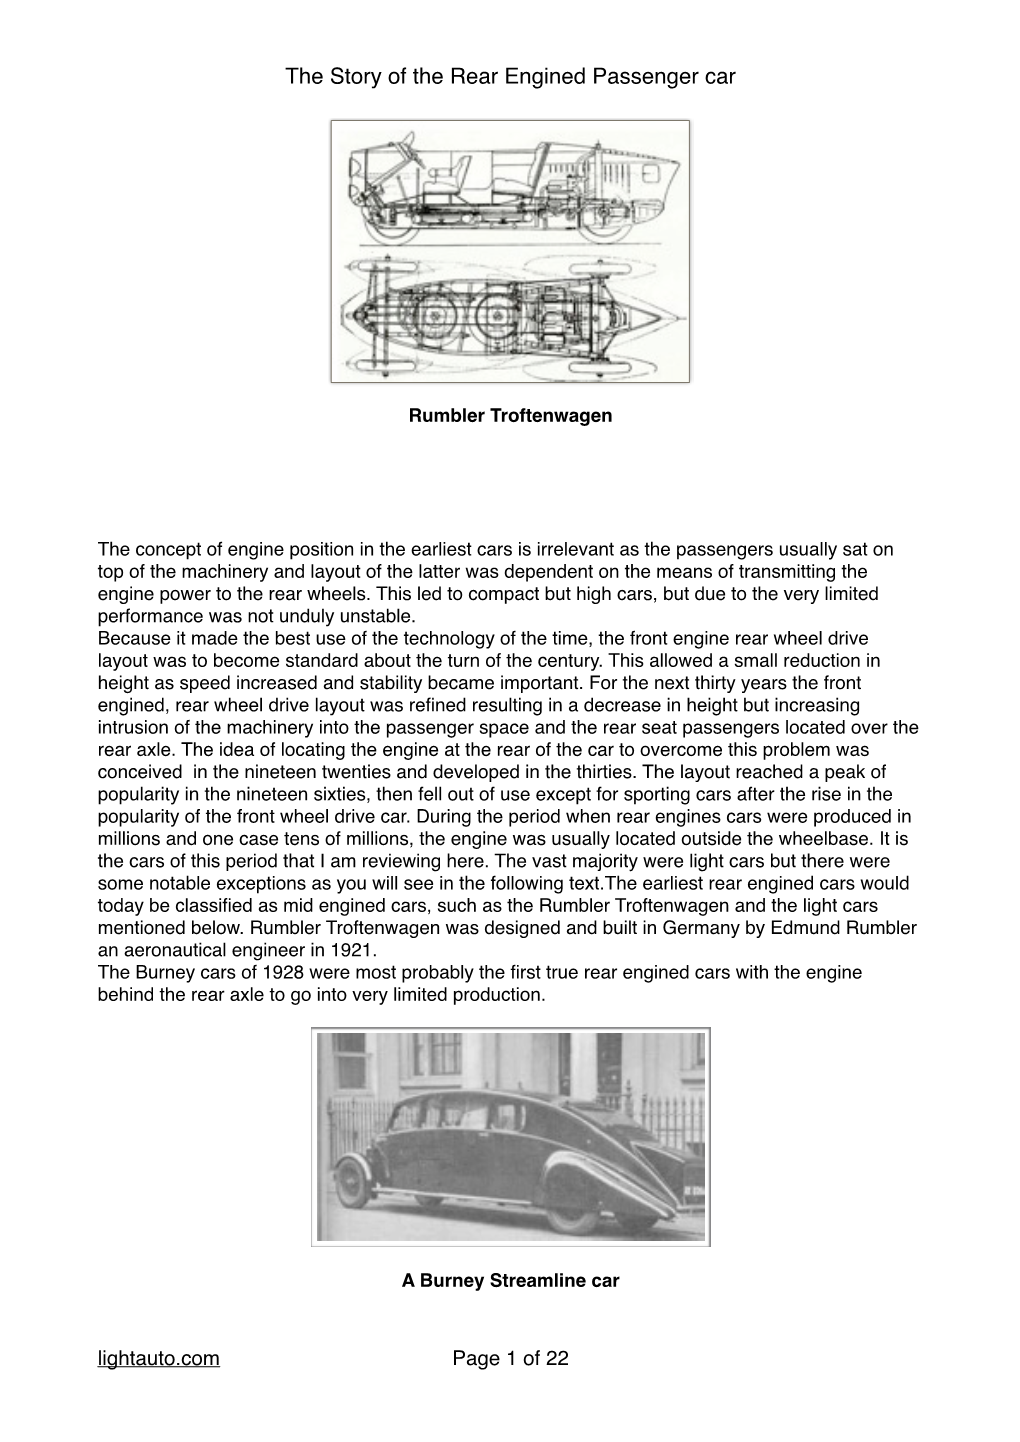 The Story of the Rear Engined Passenger Car